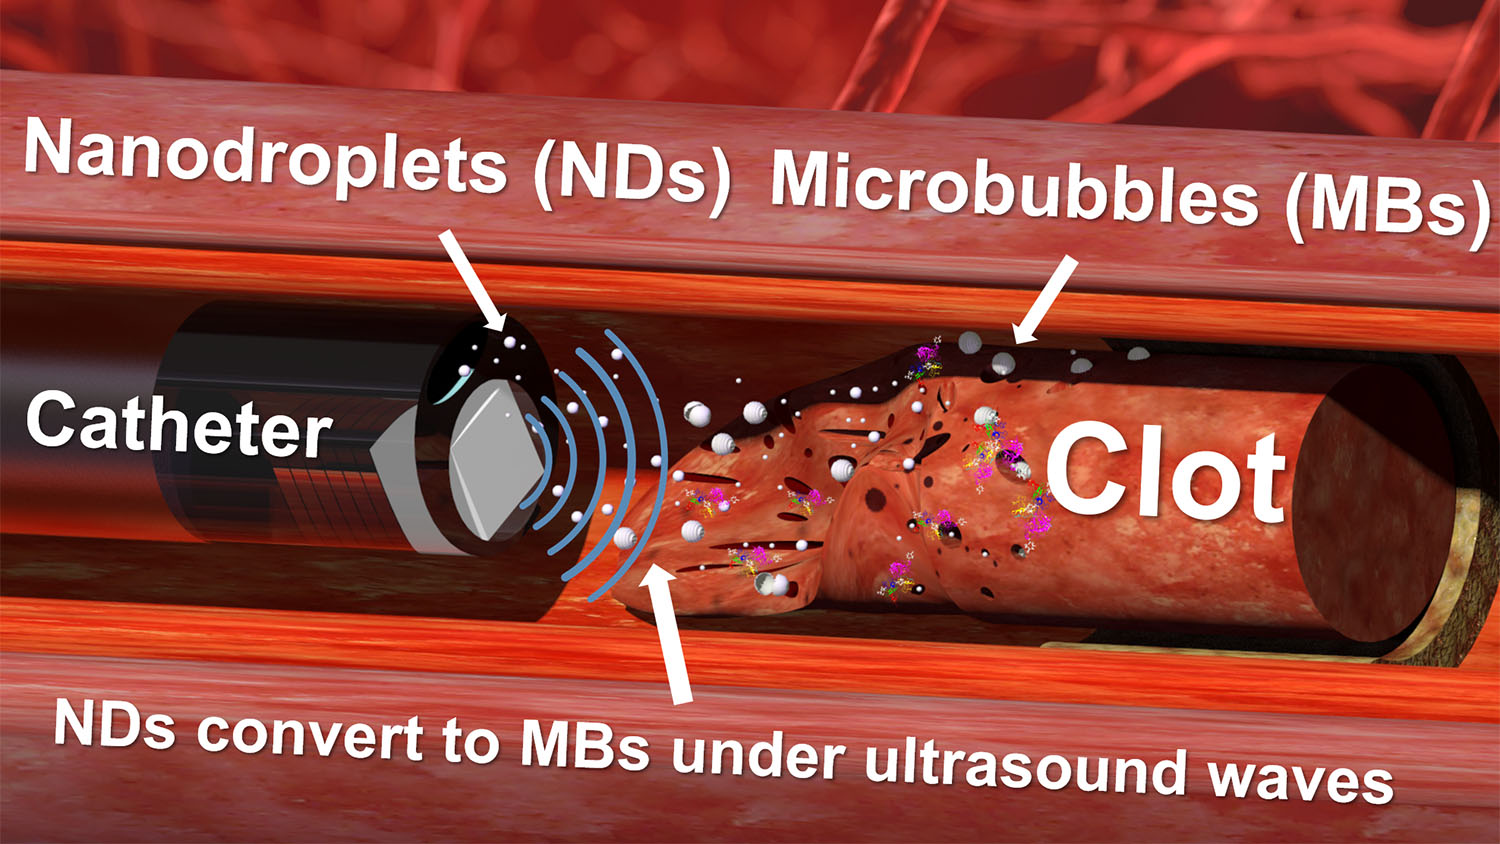 Diagram of the nanodroplet and ultrasound drill at work.